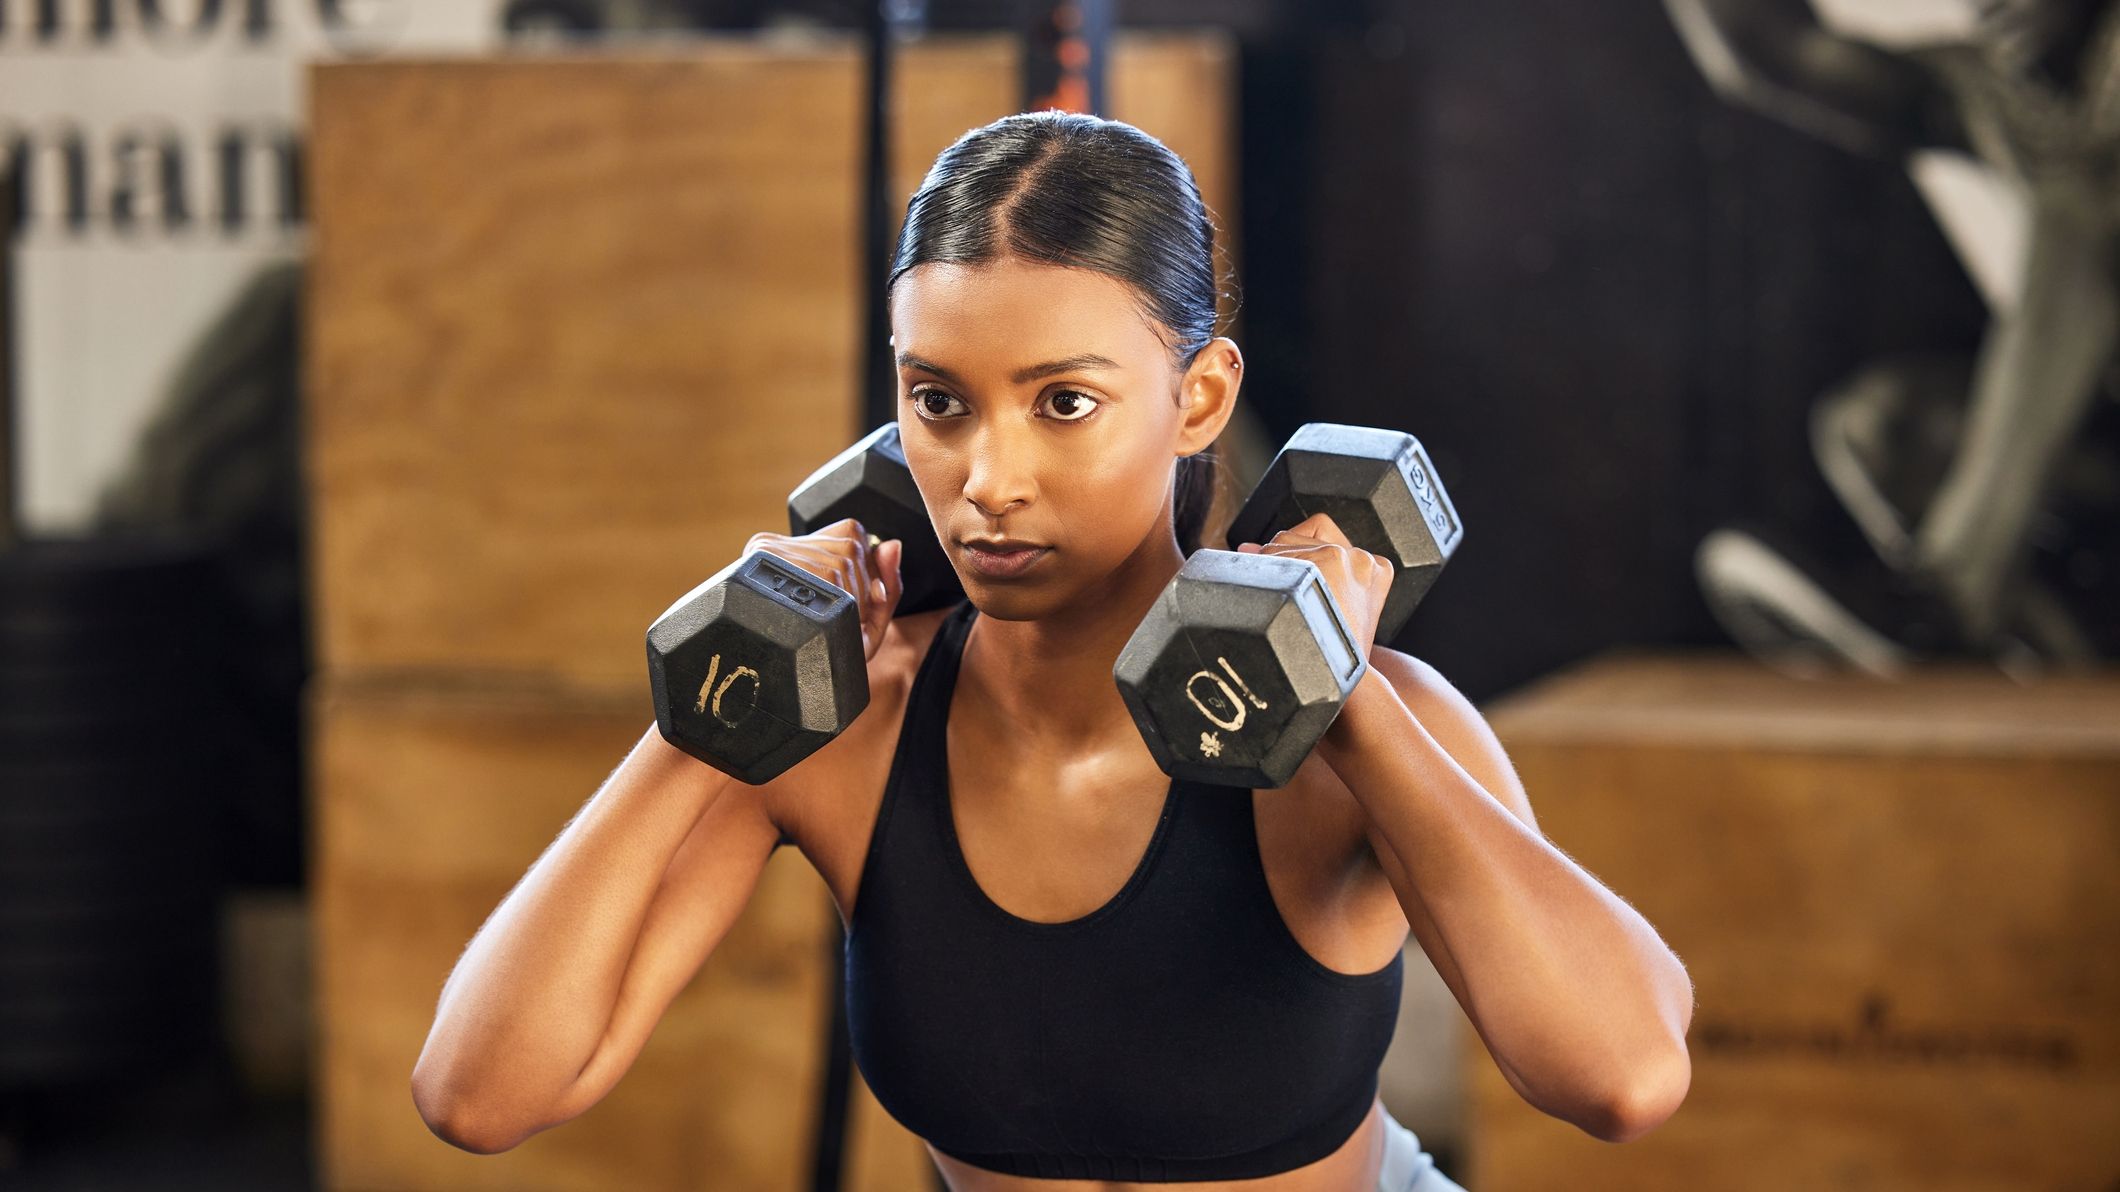 10 Ways to Stay on Track with Your Fitness Goals